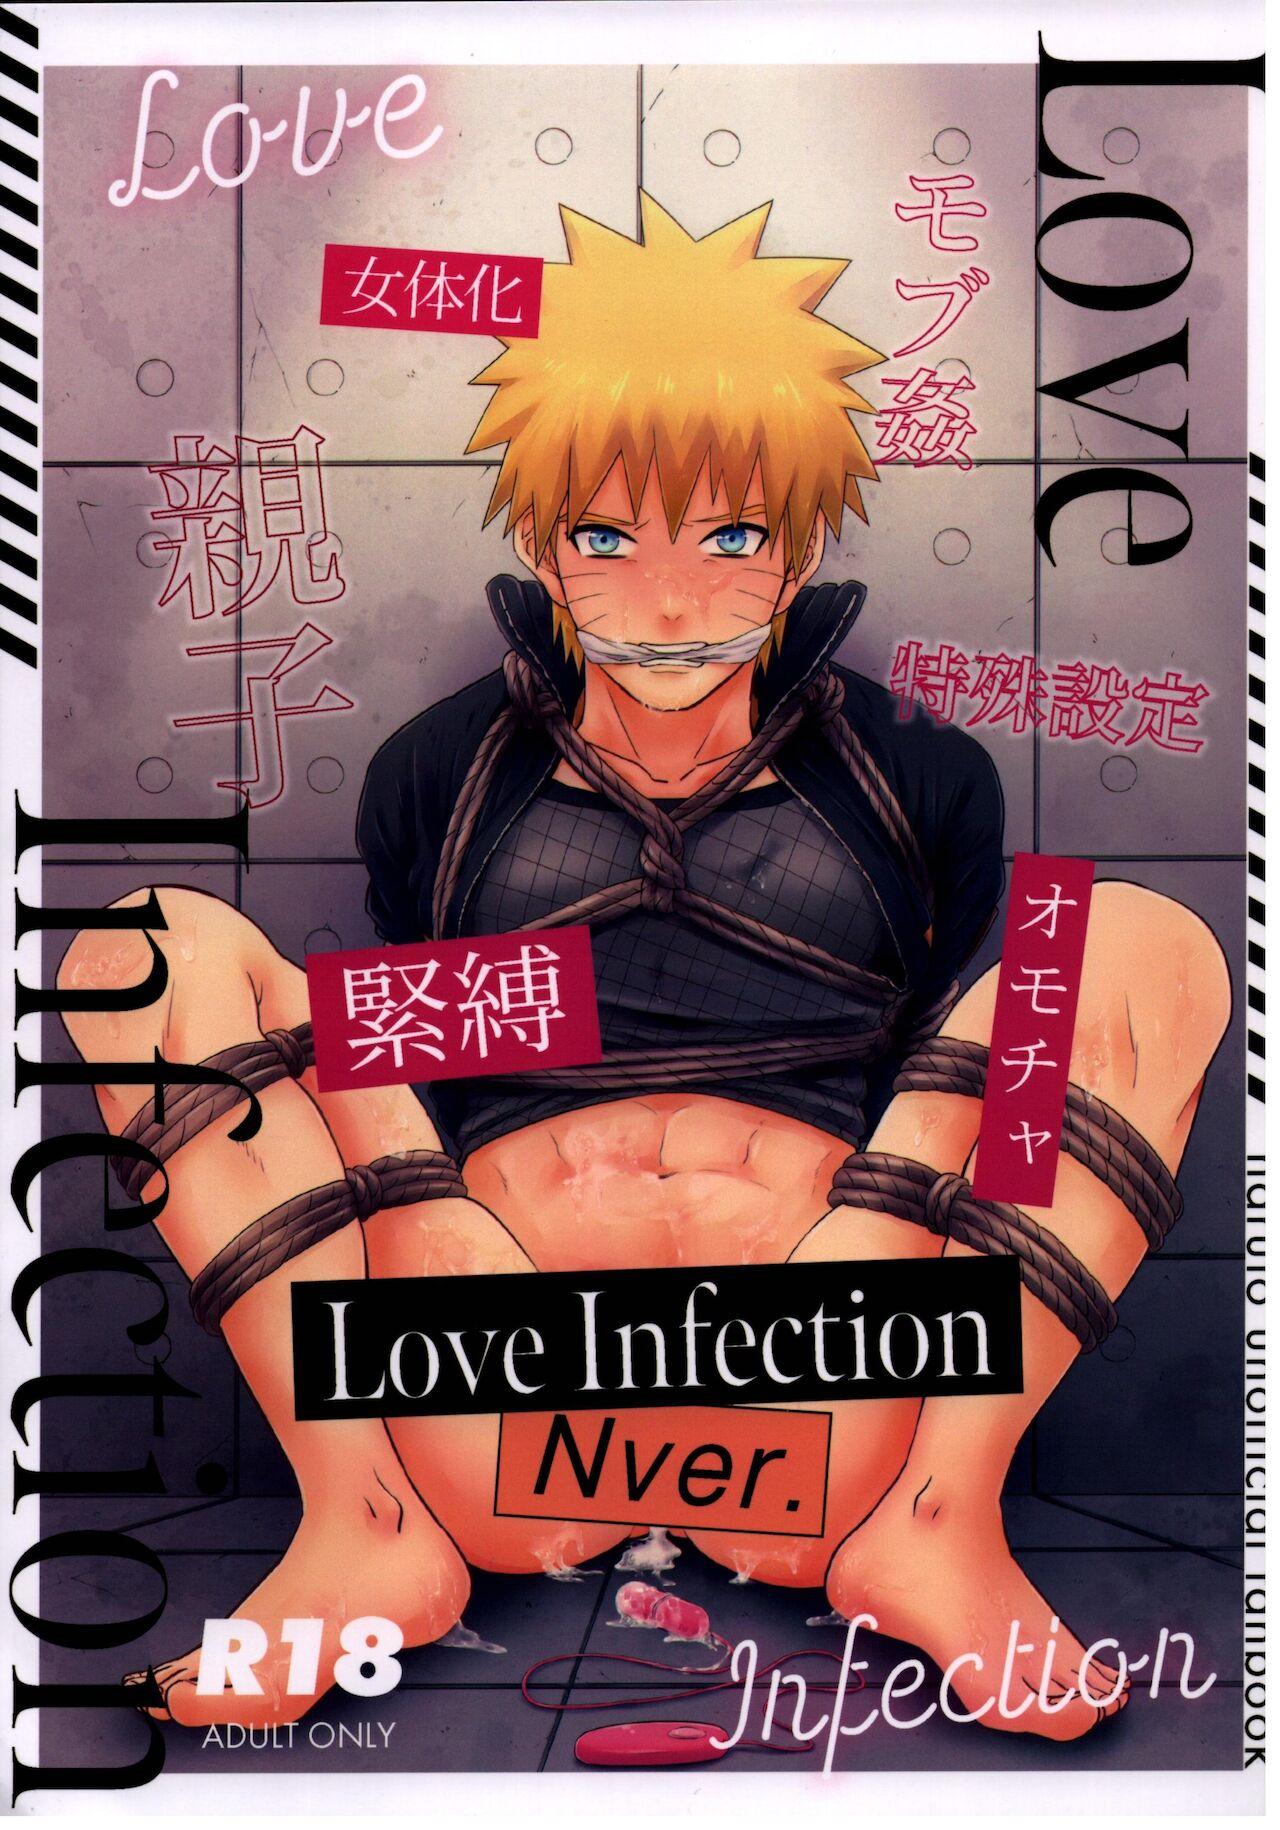 Love Infection Nver. 0